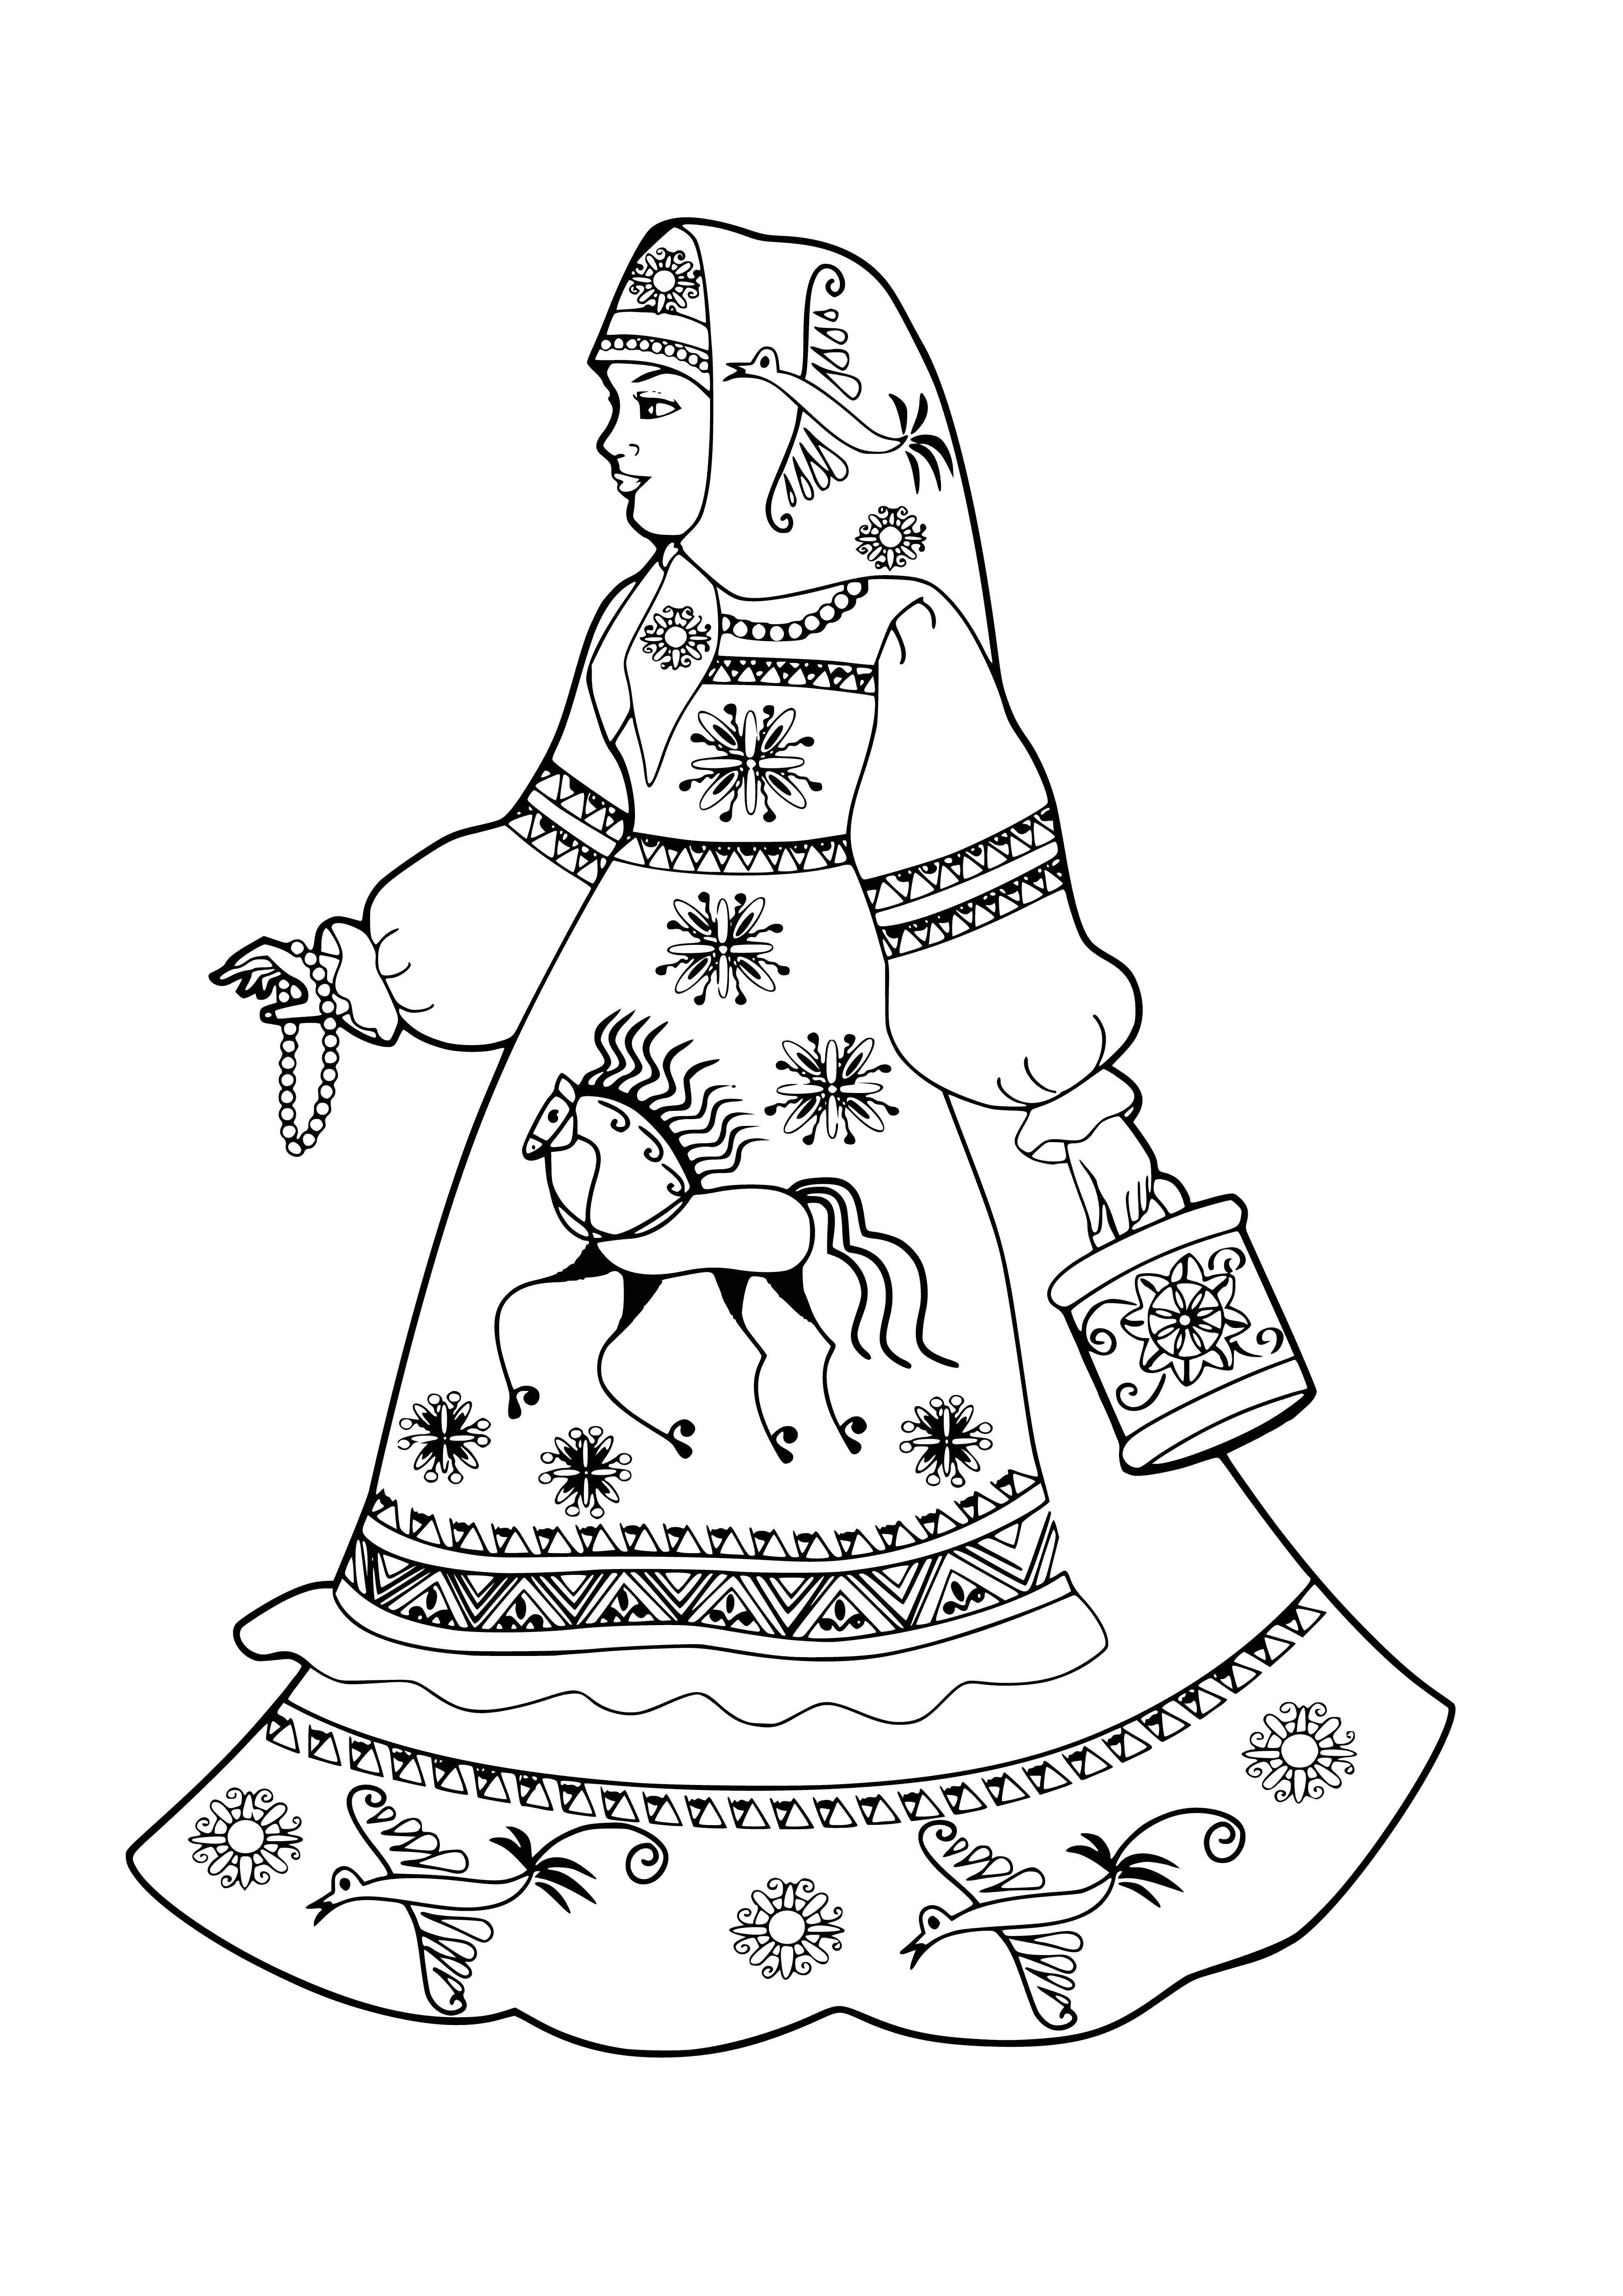 coloring page: Russian beauties w/ long, flowing hair in beautiful dresses, perfect skin & bright eyes smiling & laughing - truly stunning! #coloringpage